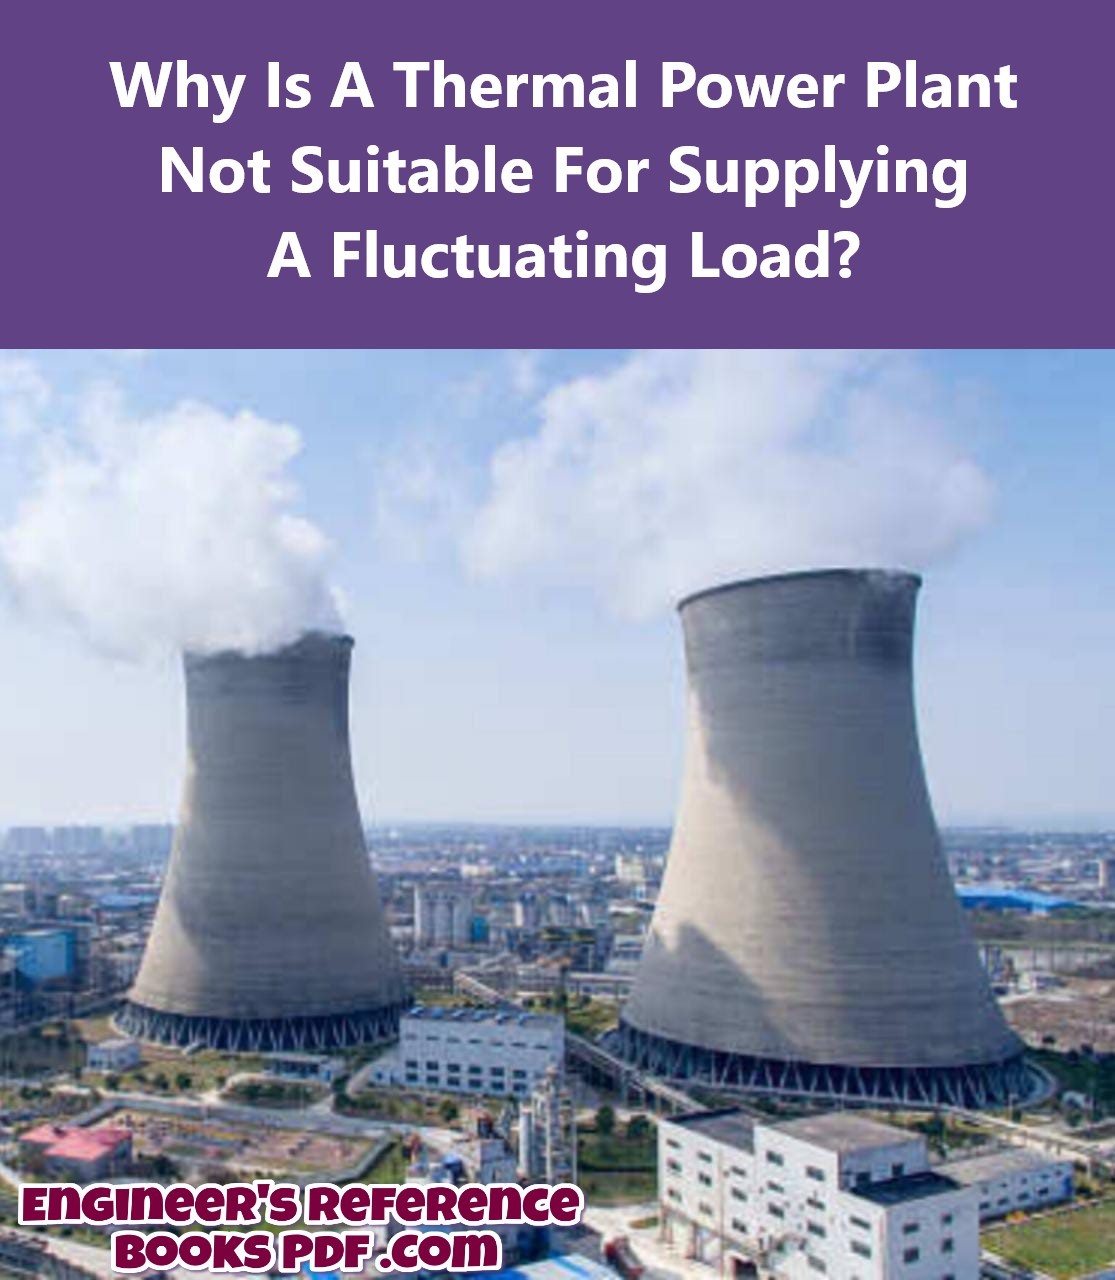 Why Is A Thermal Power Plant Not Suitable For Supplying A Fluctuating Load?